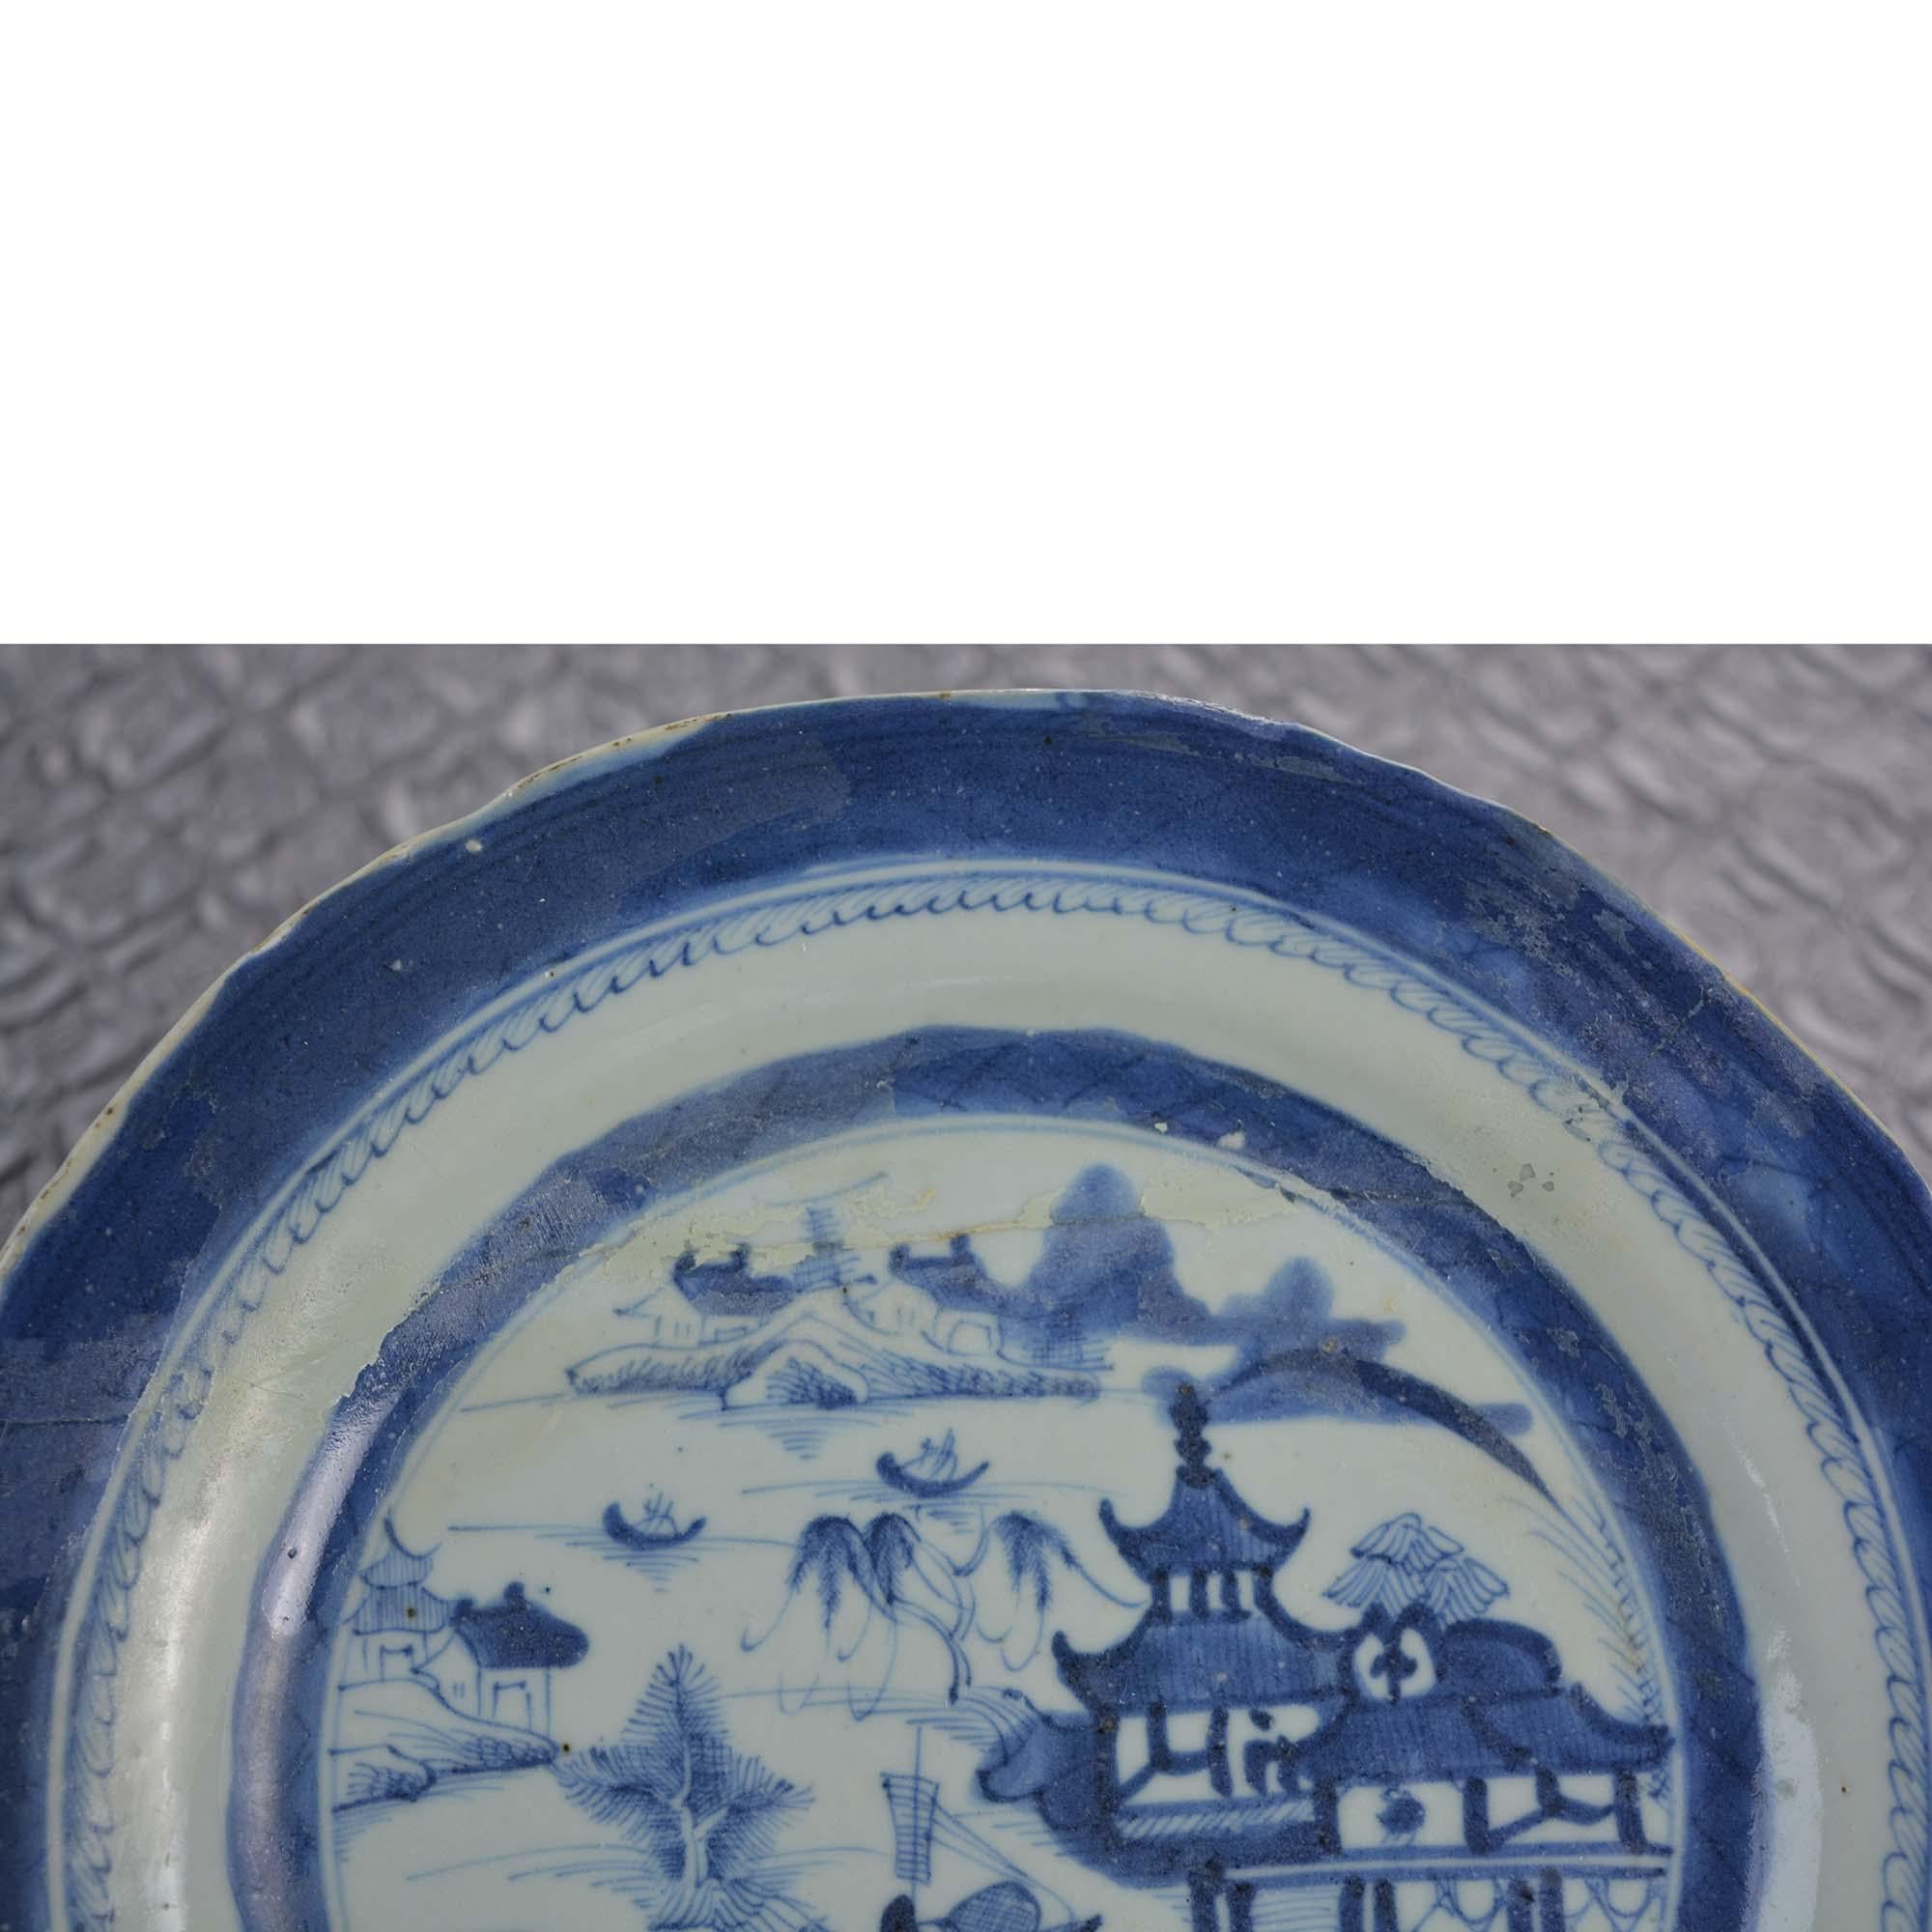 18th Century Canton Ware Plate In Good Condition For Sale In Pataskala, OH